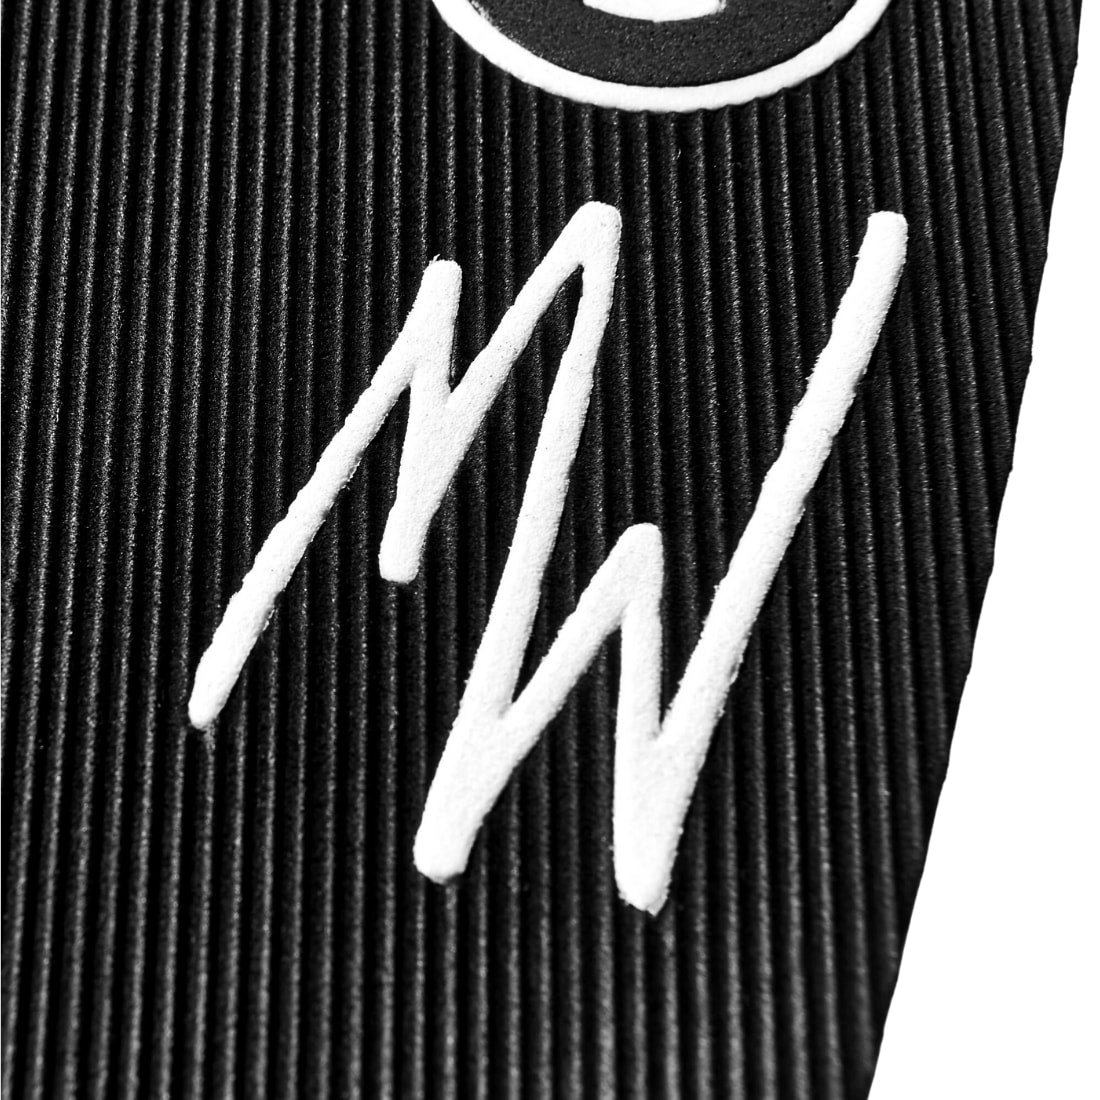 Dreded Mikey Wright Signature Tail Pad - Black - 2 Piece Tail Pad by Dreded